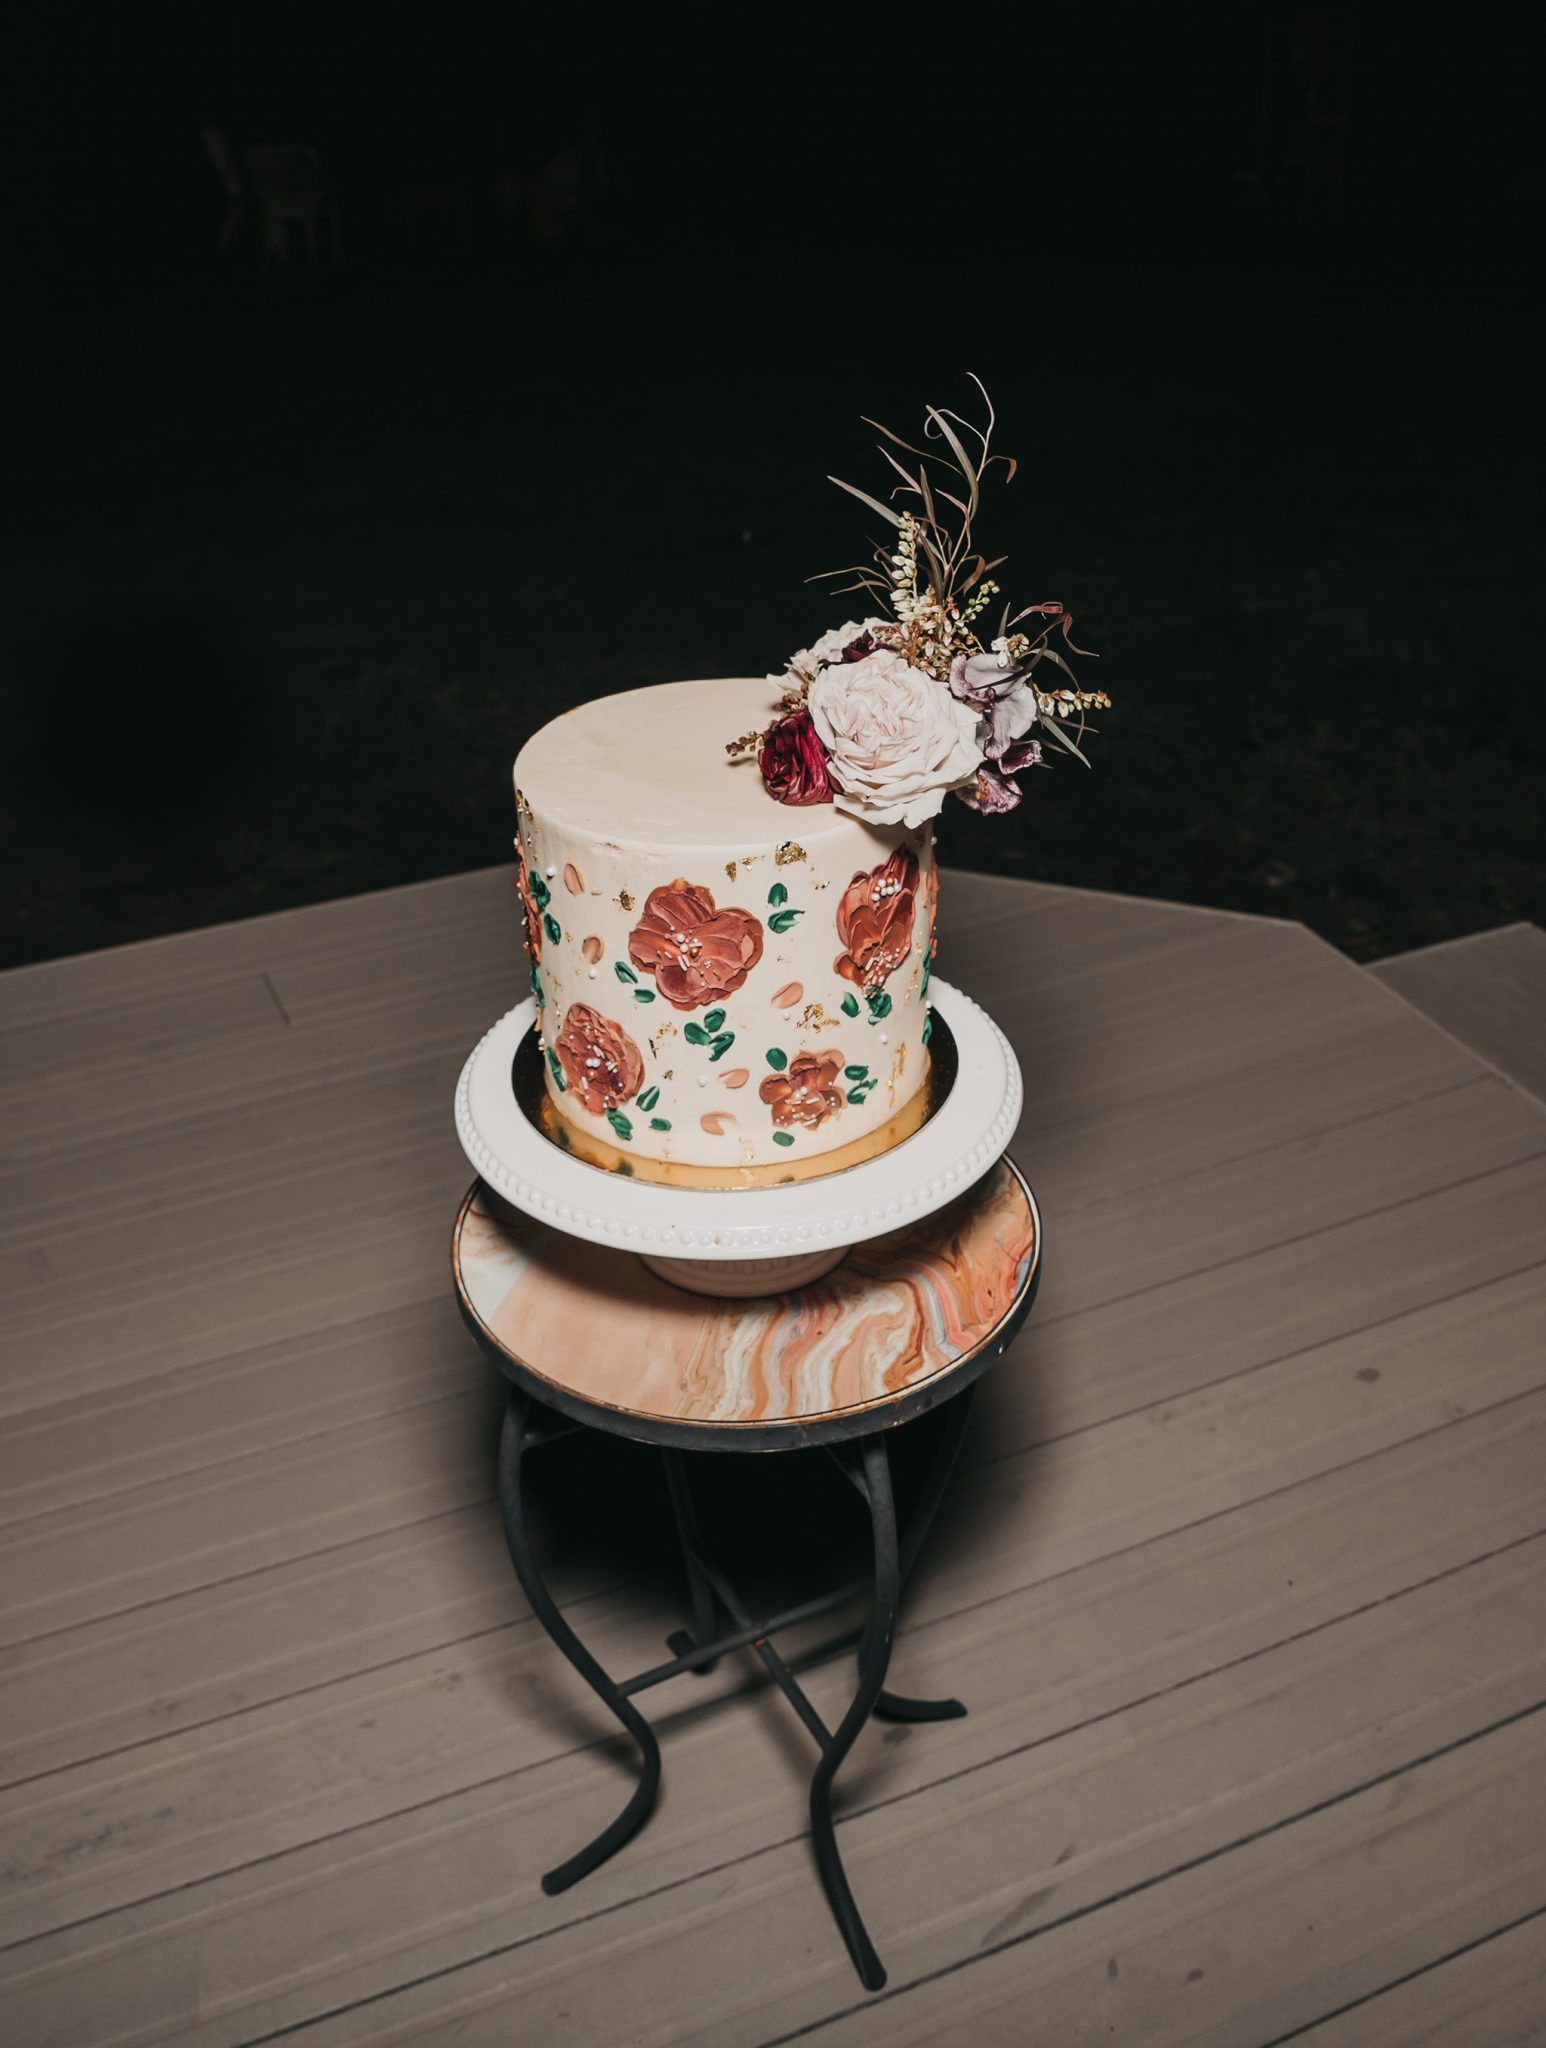 Real Wedding - Countryside Nuptials & Moroccan Styled Reception - featured on Junebug and Bronte Bride, wedding cake